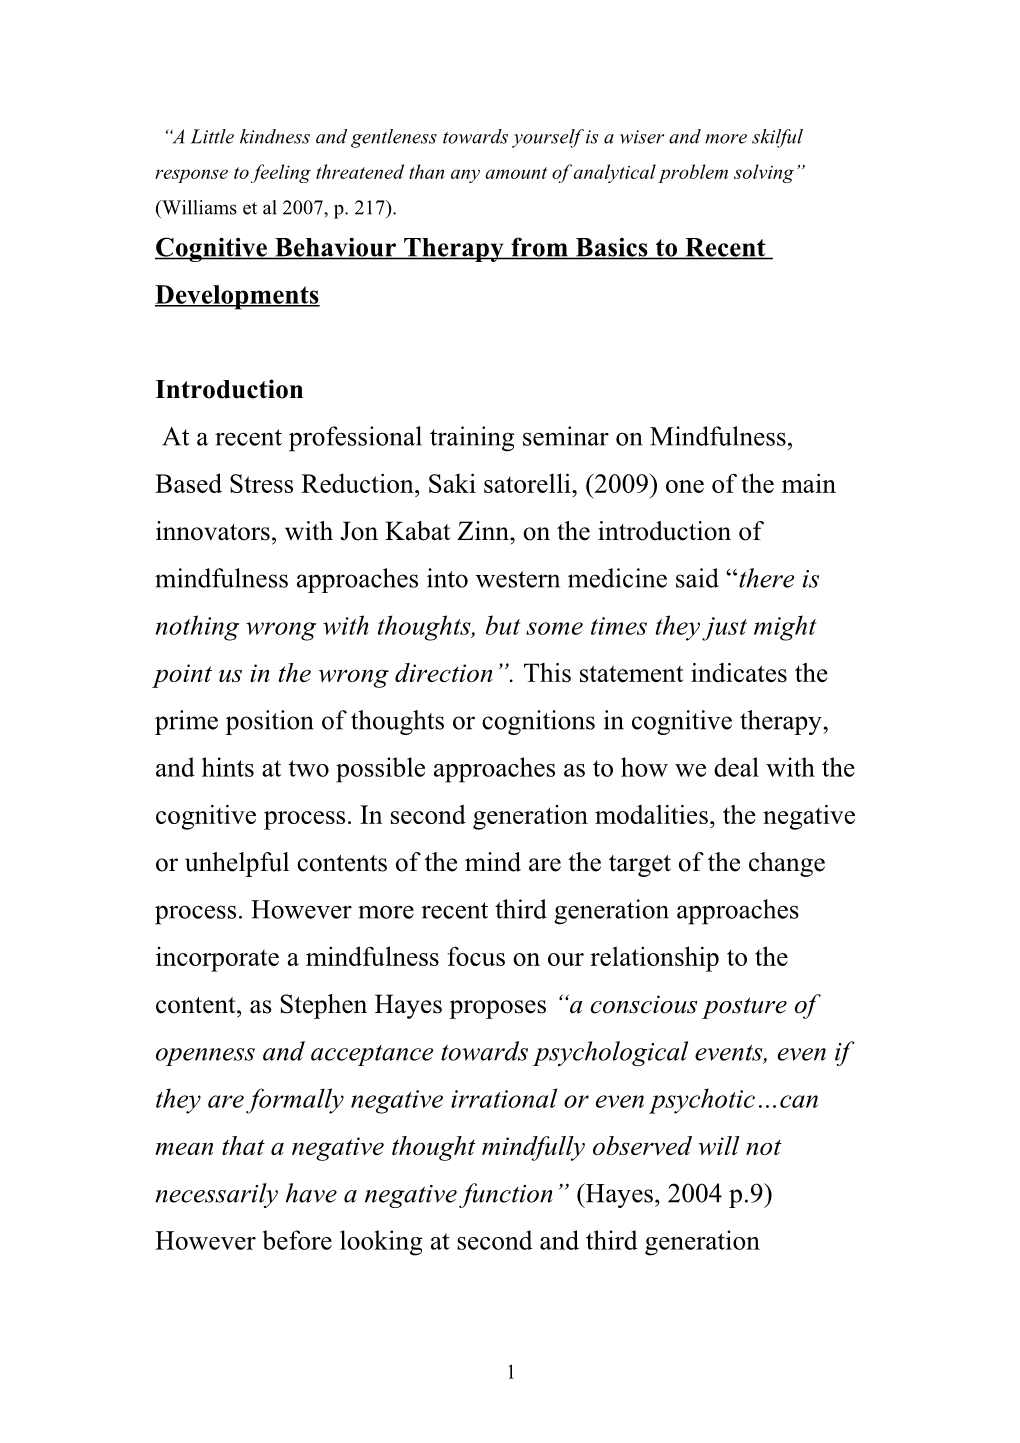 Cognitive Behaviour Therapy, from Basic Techniques to Recent Innovations, and Its Application